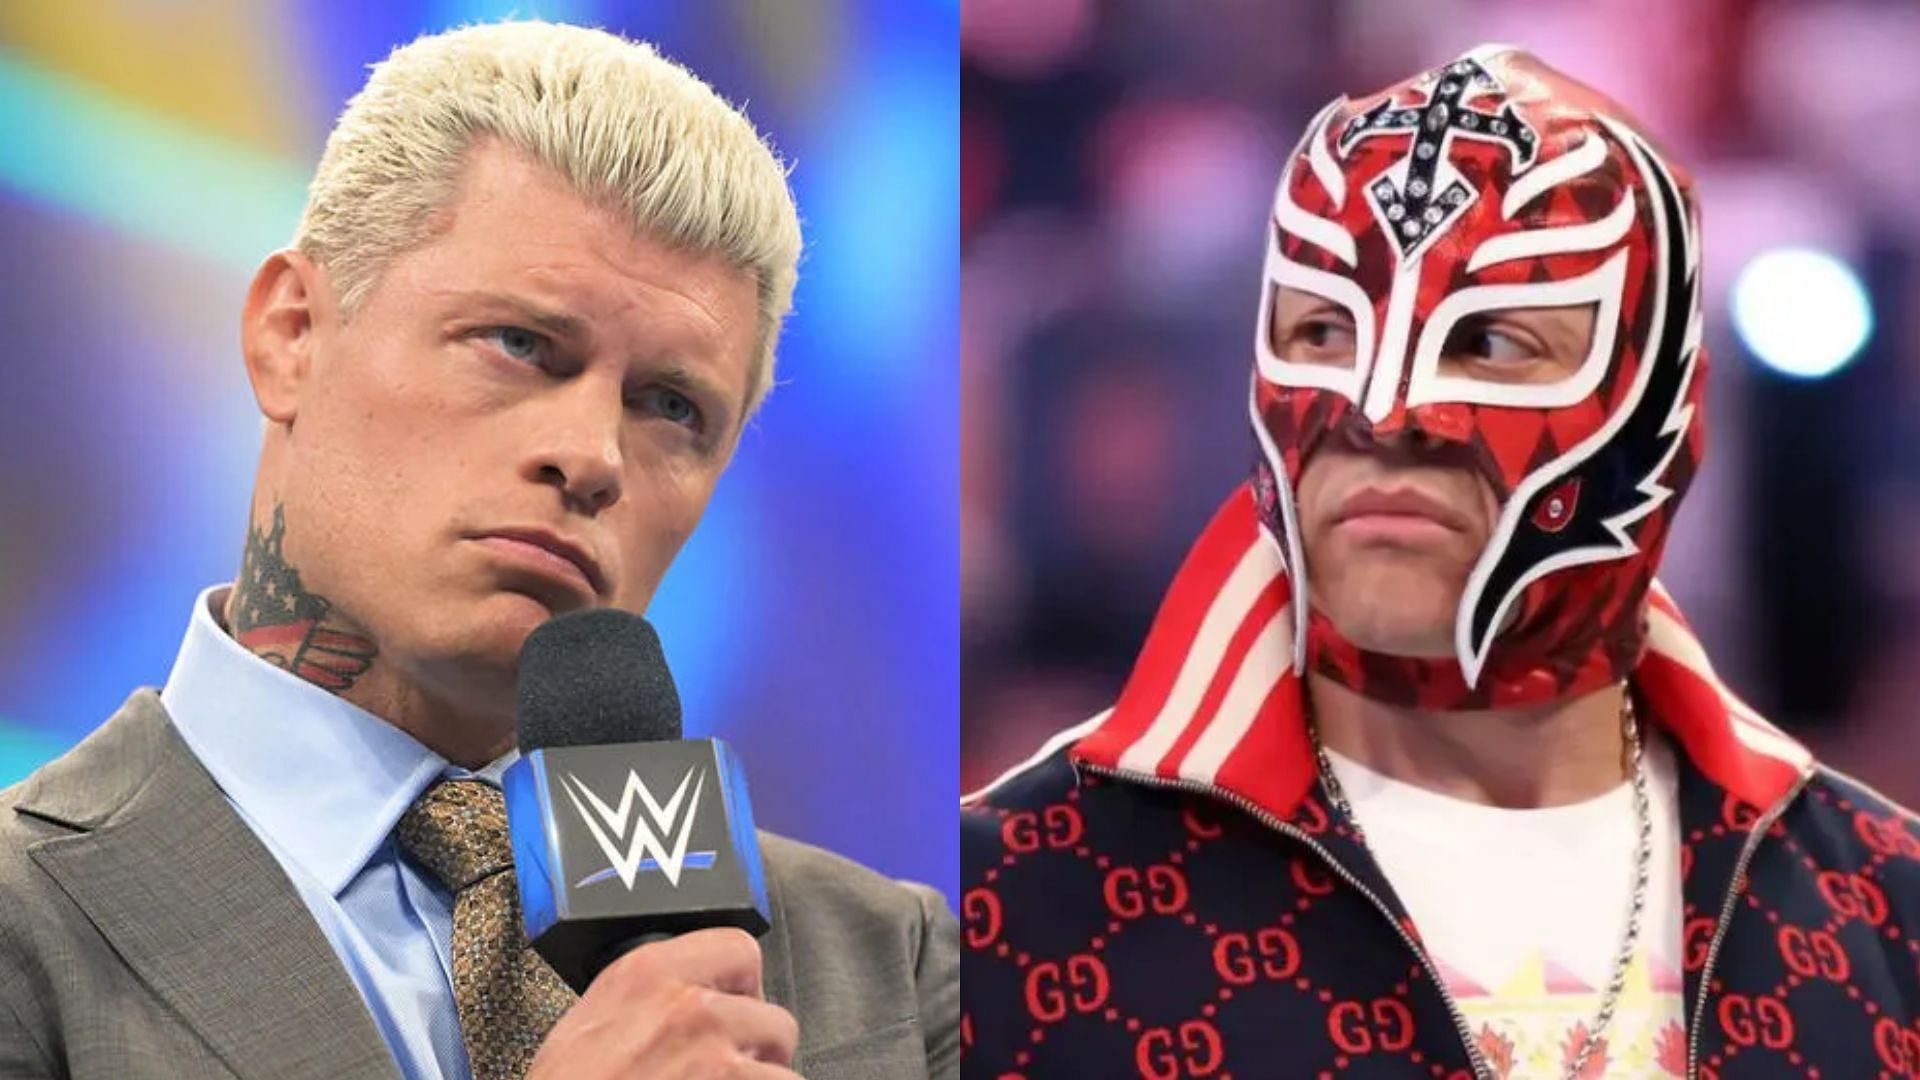 Cody Rhodes and Rey Mysterio faced each other at WrestleMania 12 years ago